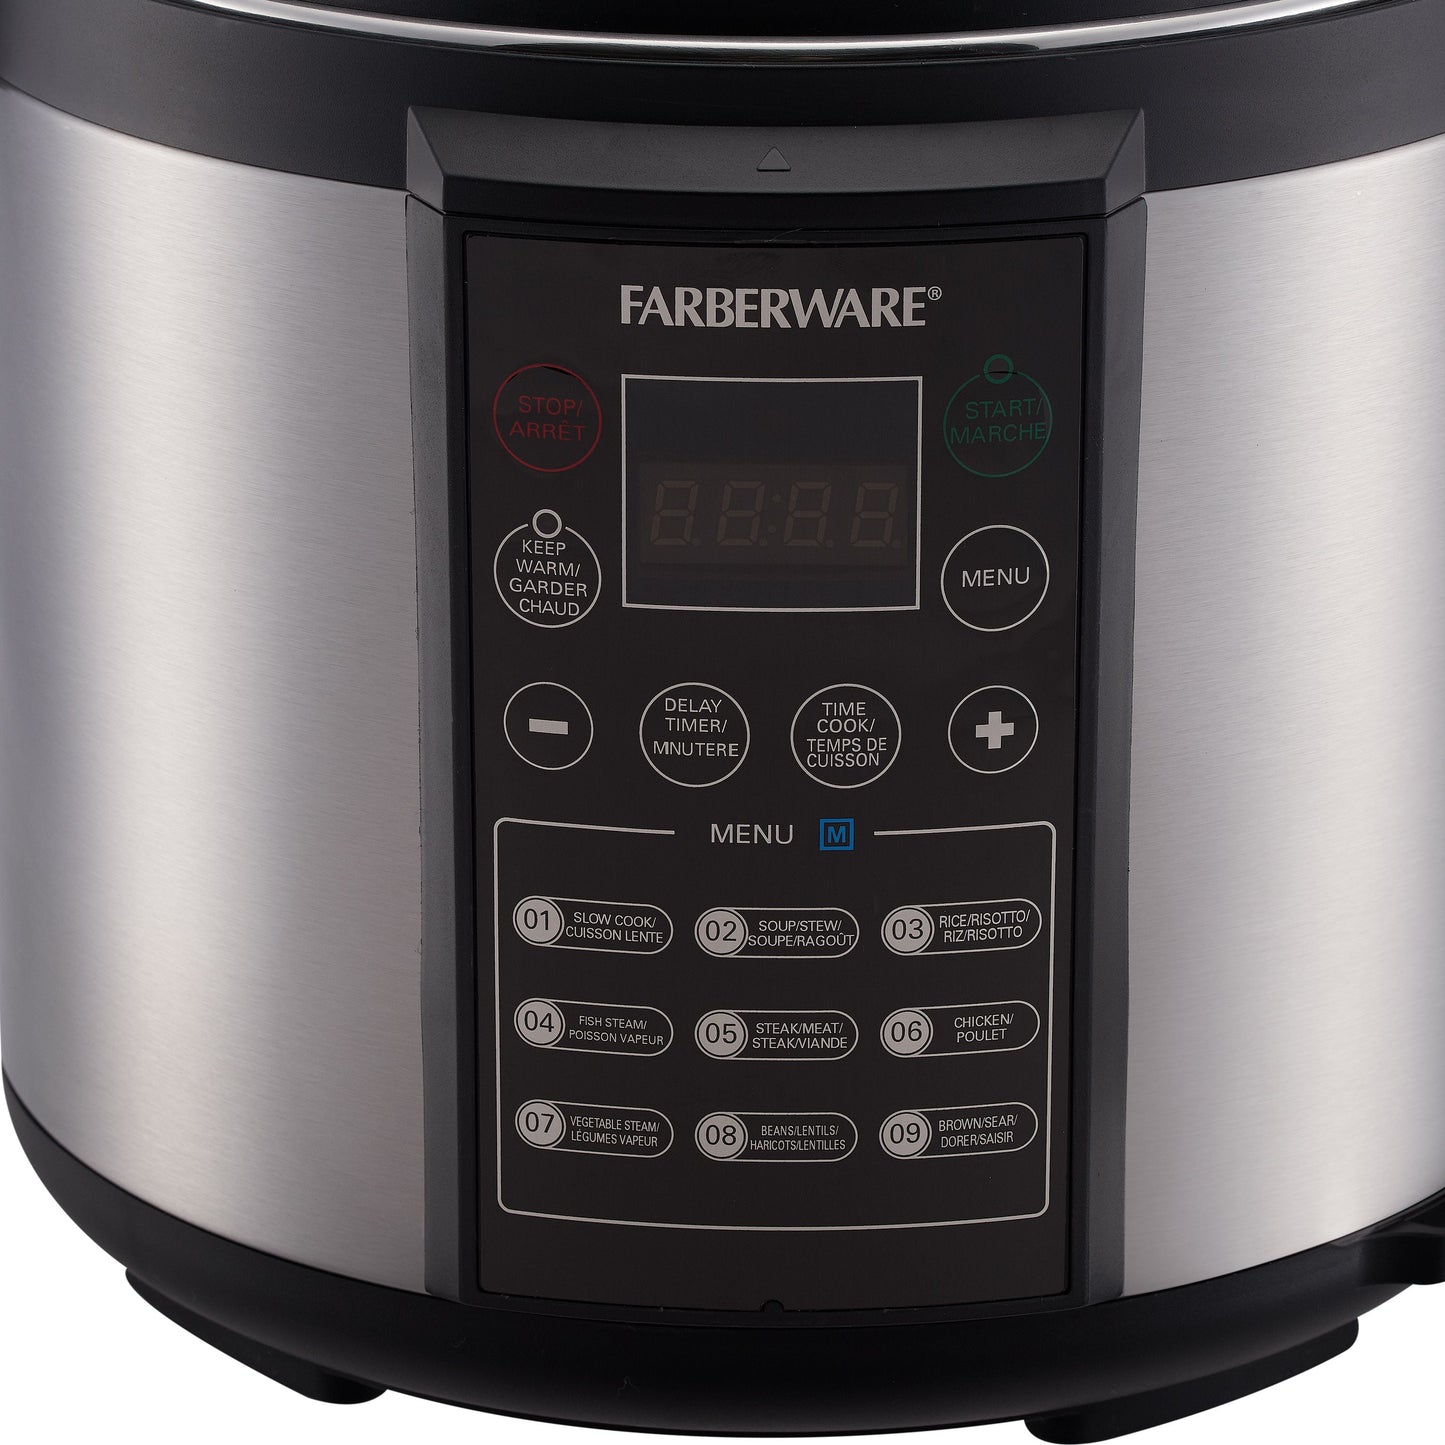 6 Qt Instant Pot Programmable Digital Pressure Cooker - The Perfect Kitchen Appliance for Quick, Easy, Delicious Meals!